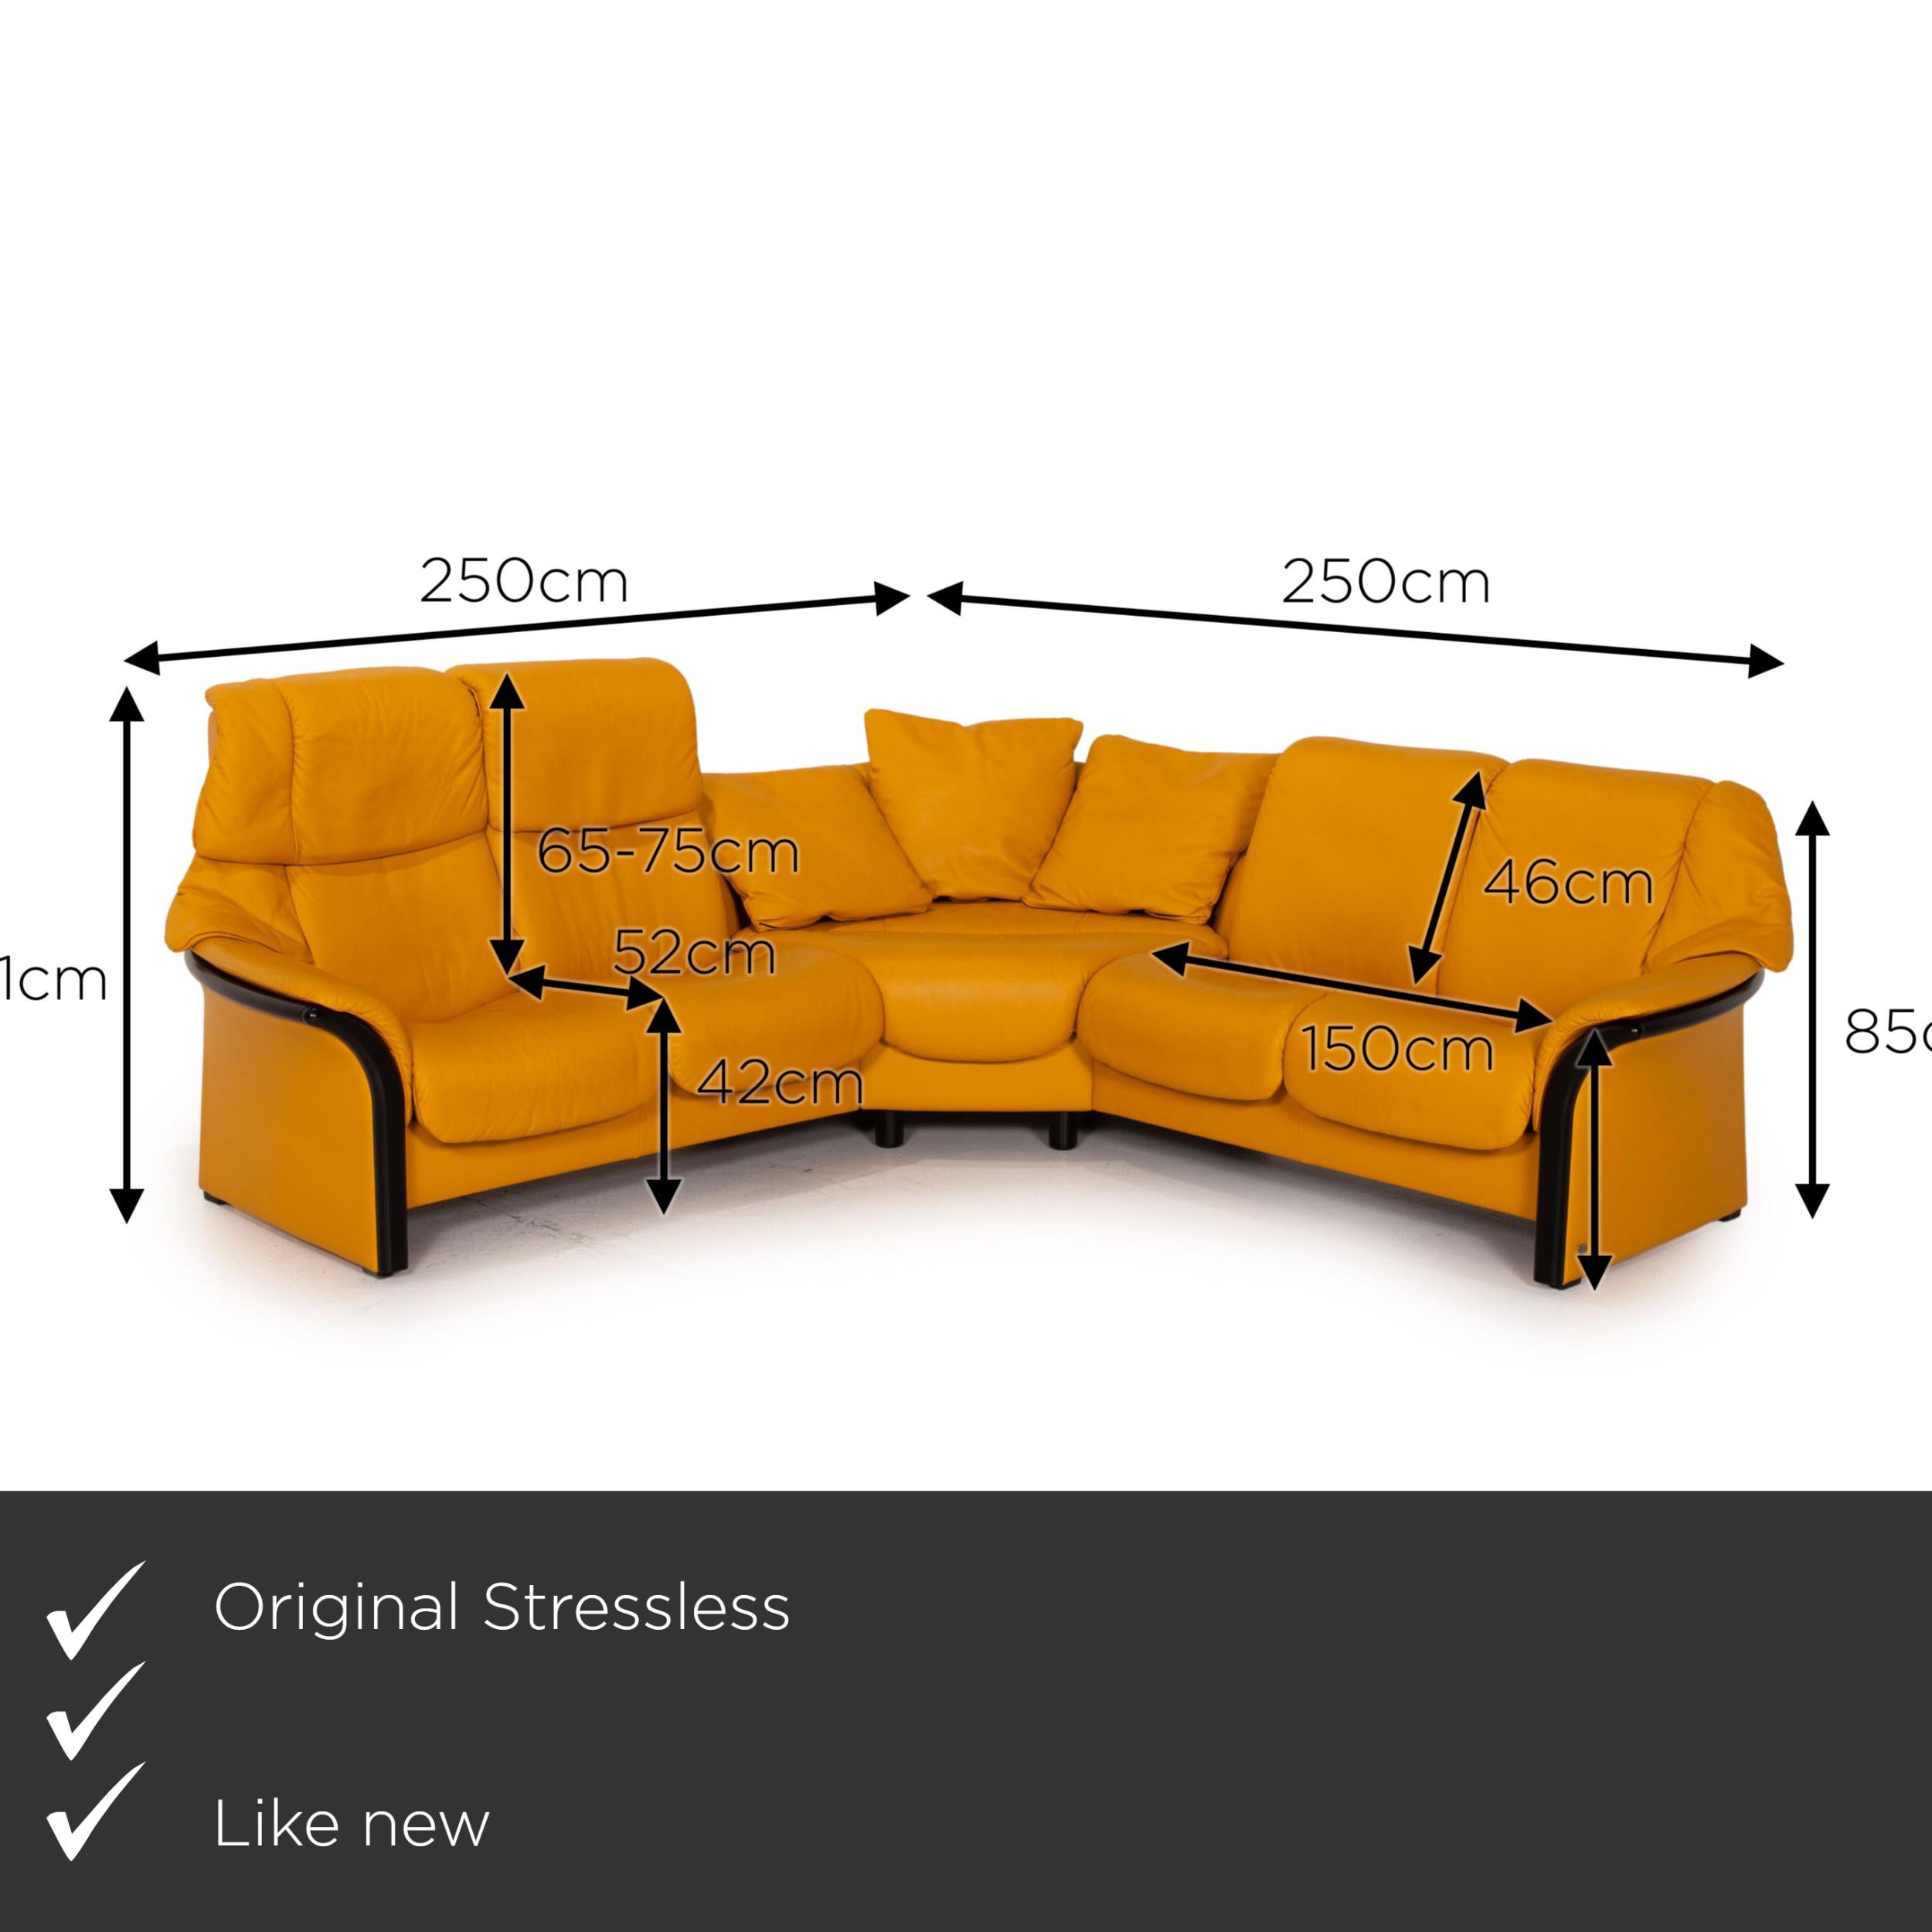 We present to you a Stressless Eldorado leather corner sofa yellow relax function sofa couch.
 

 Product measurements in centimeters:
 

Depth: 80
Width: 250
Height: 102
Seat height: 42
Rest height: 55
Seat depth: 52
Seat width: